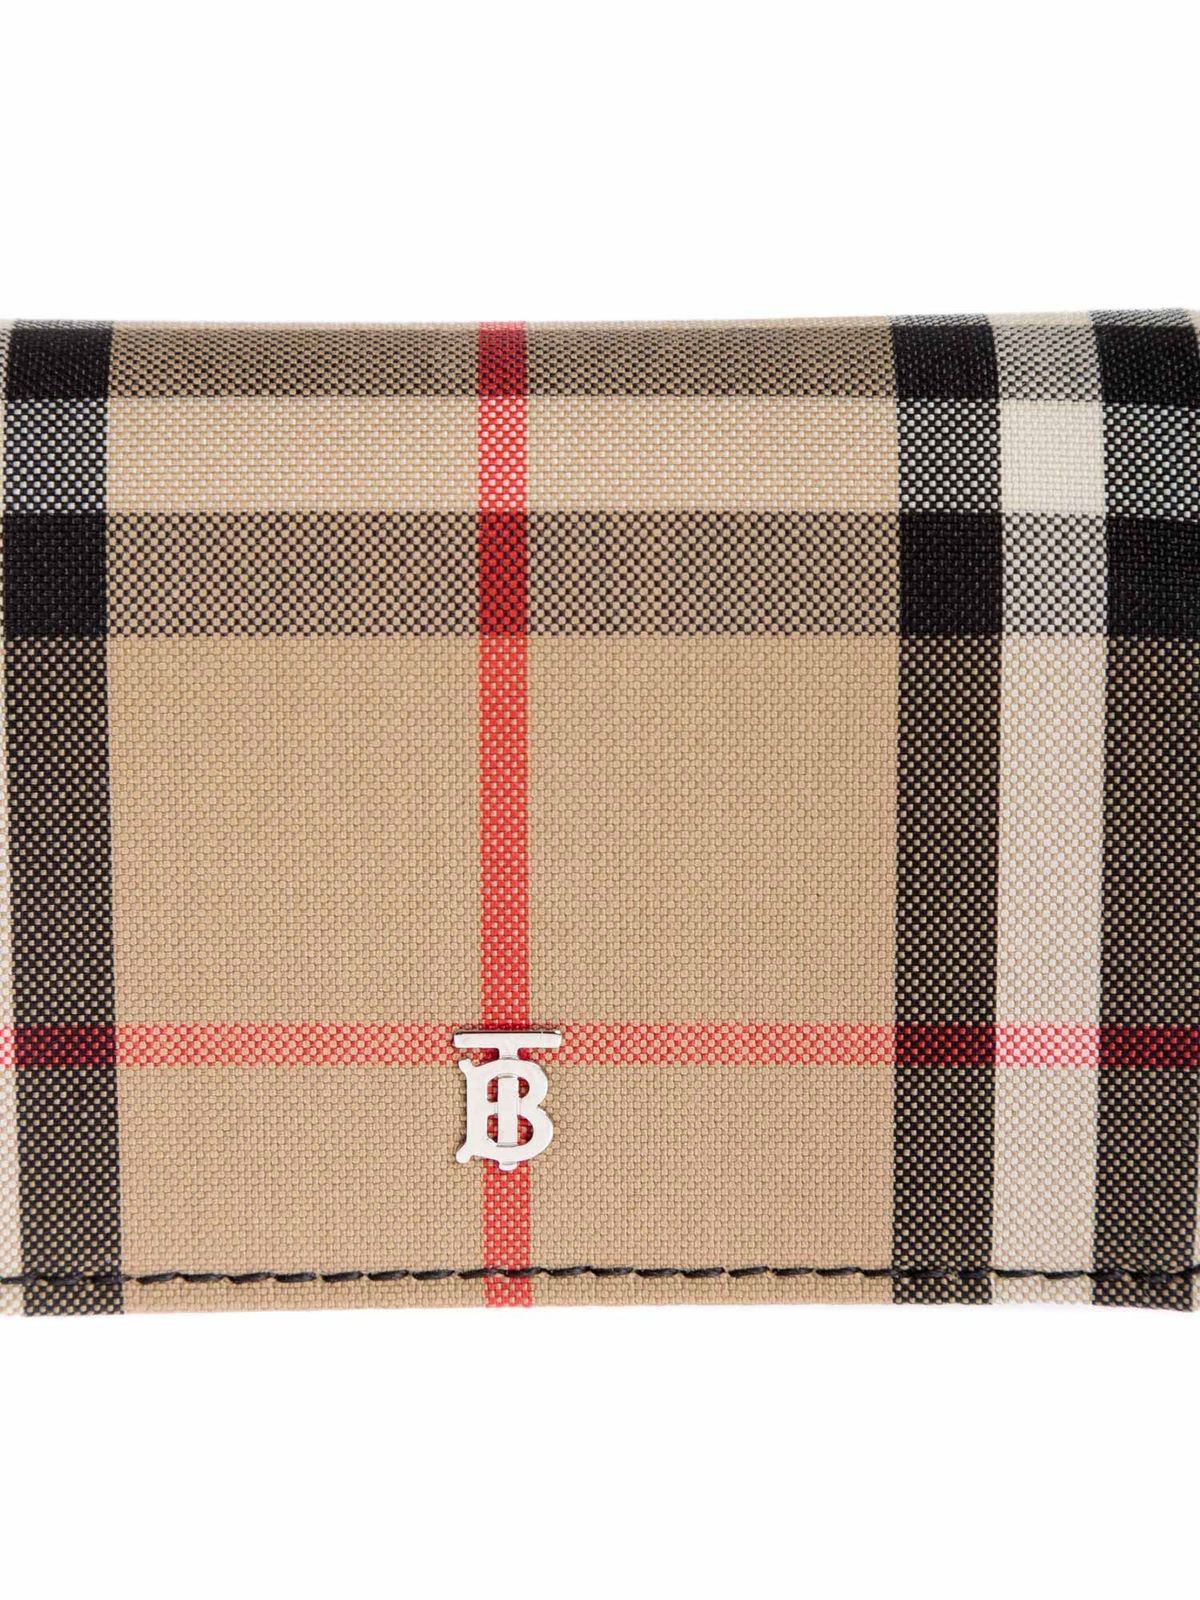 Burberry Jessie Vintage Check & Leather Card Case On Chain in